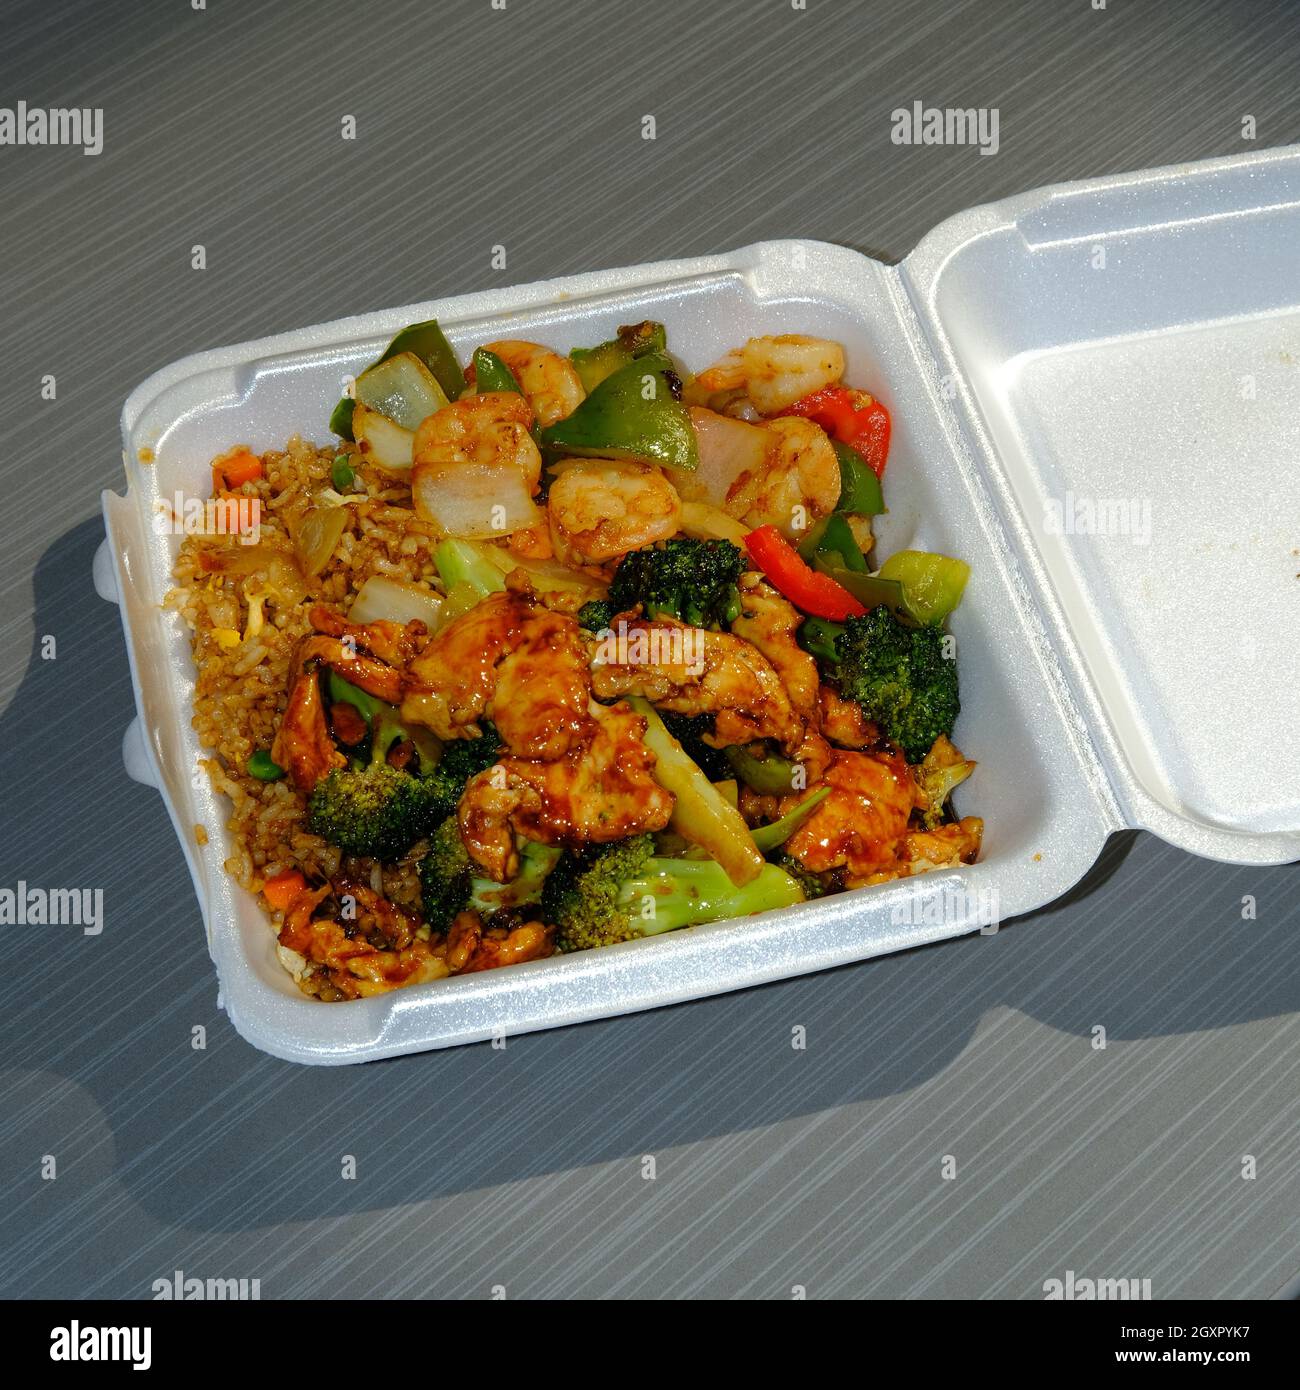 chinese food takeout bowl